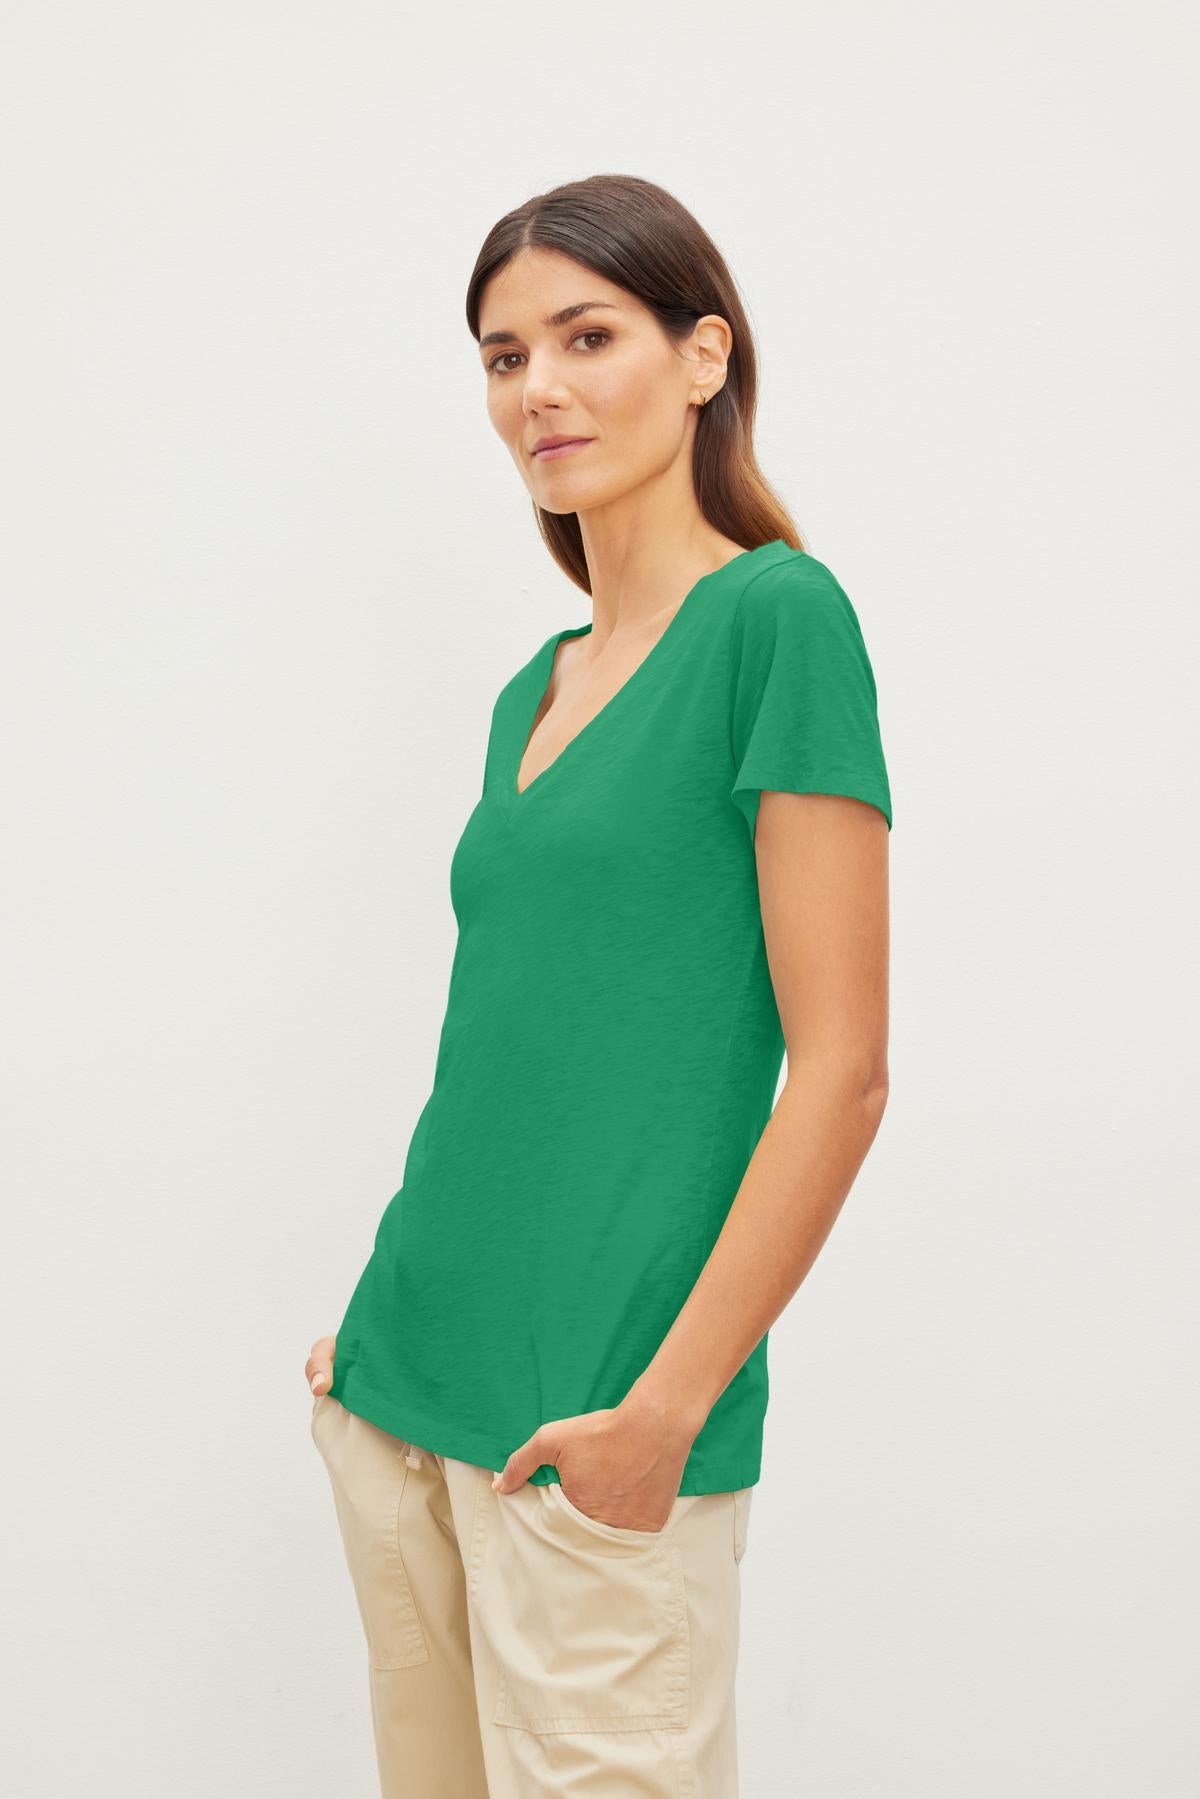 Woman in a LILITH COTTON SLUB V-NECK TEE by Velvet by Graham & Spencer and beige pants standing against a white background, looking at the camera with a soft smile.-36910215069889